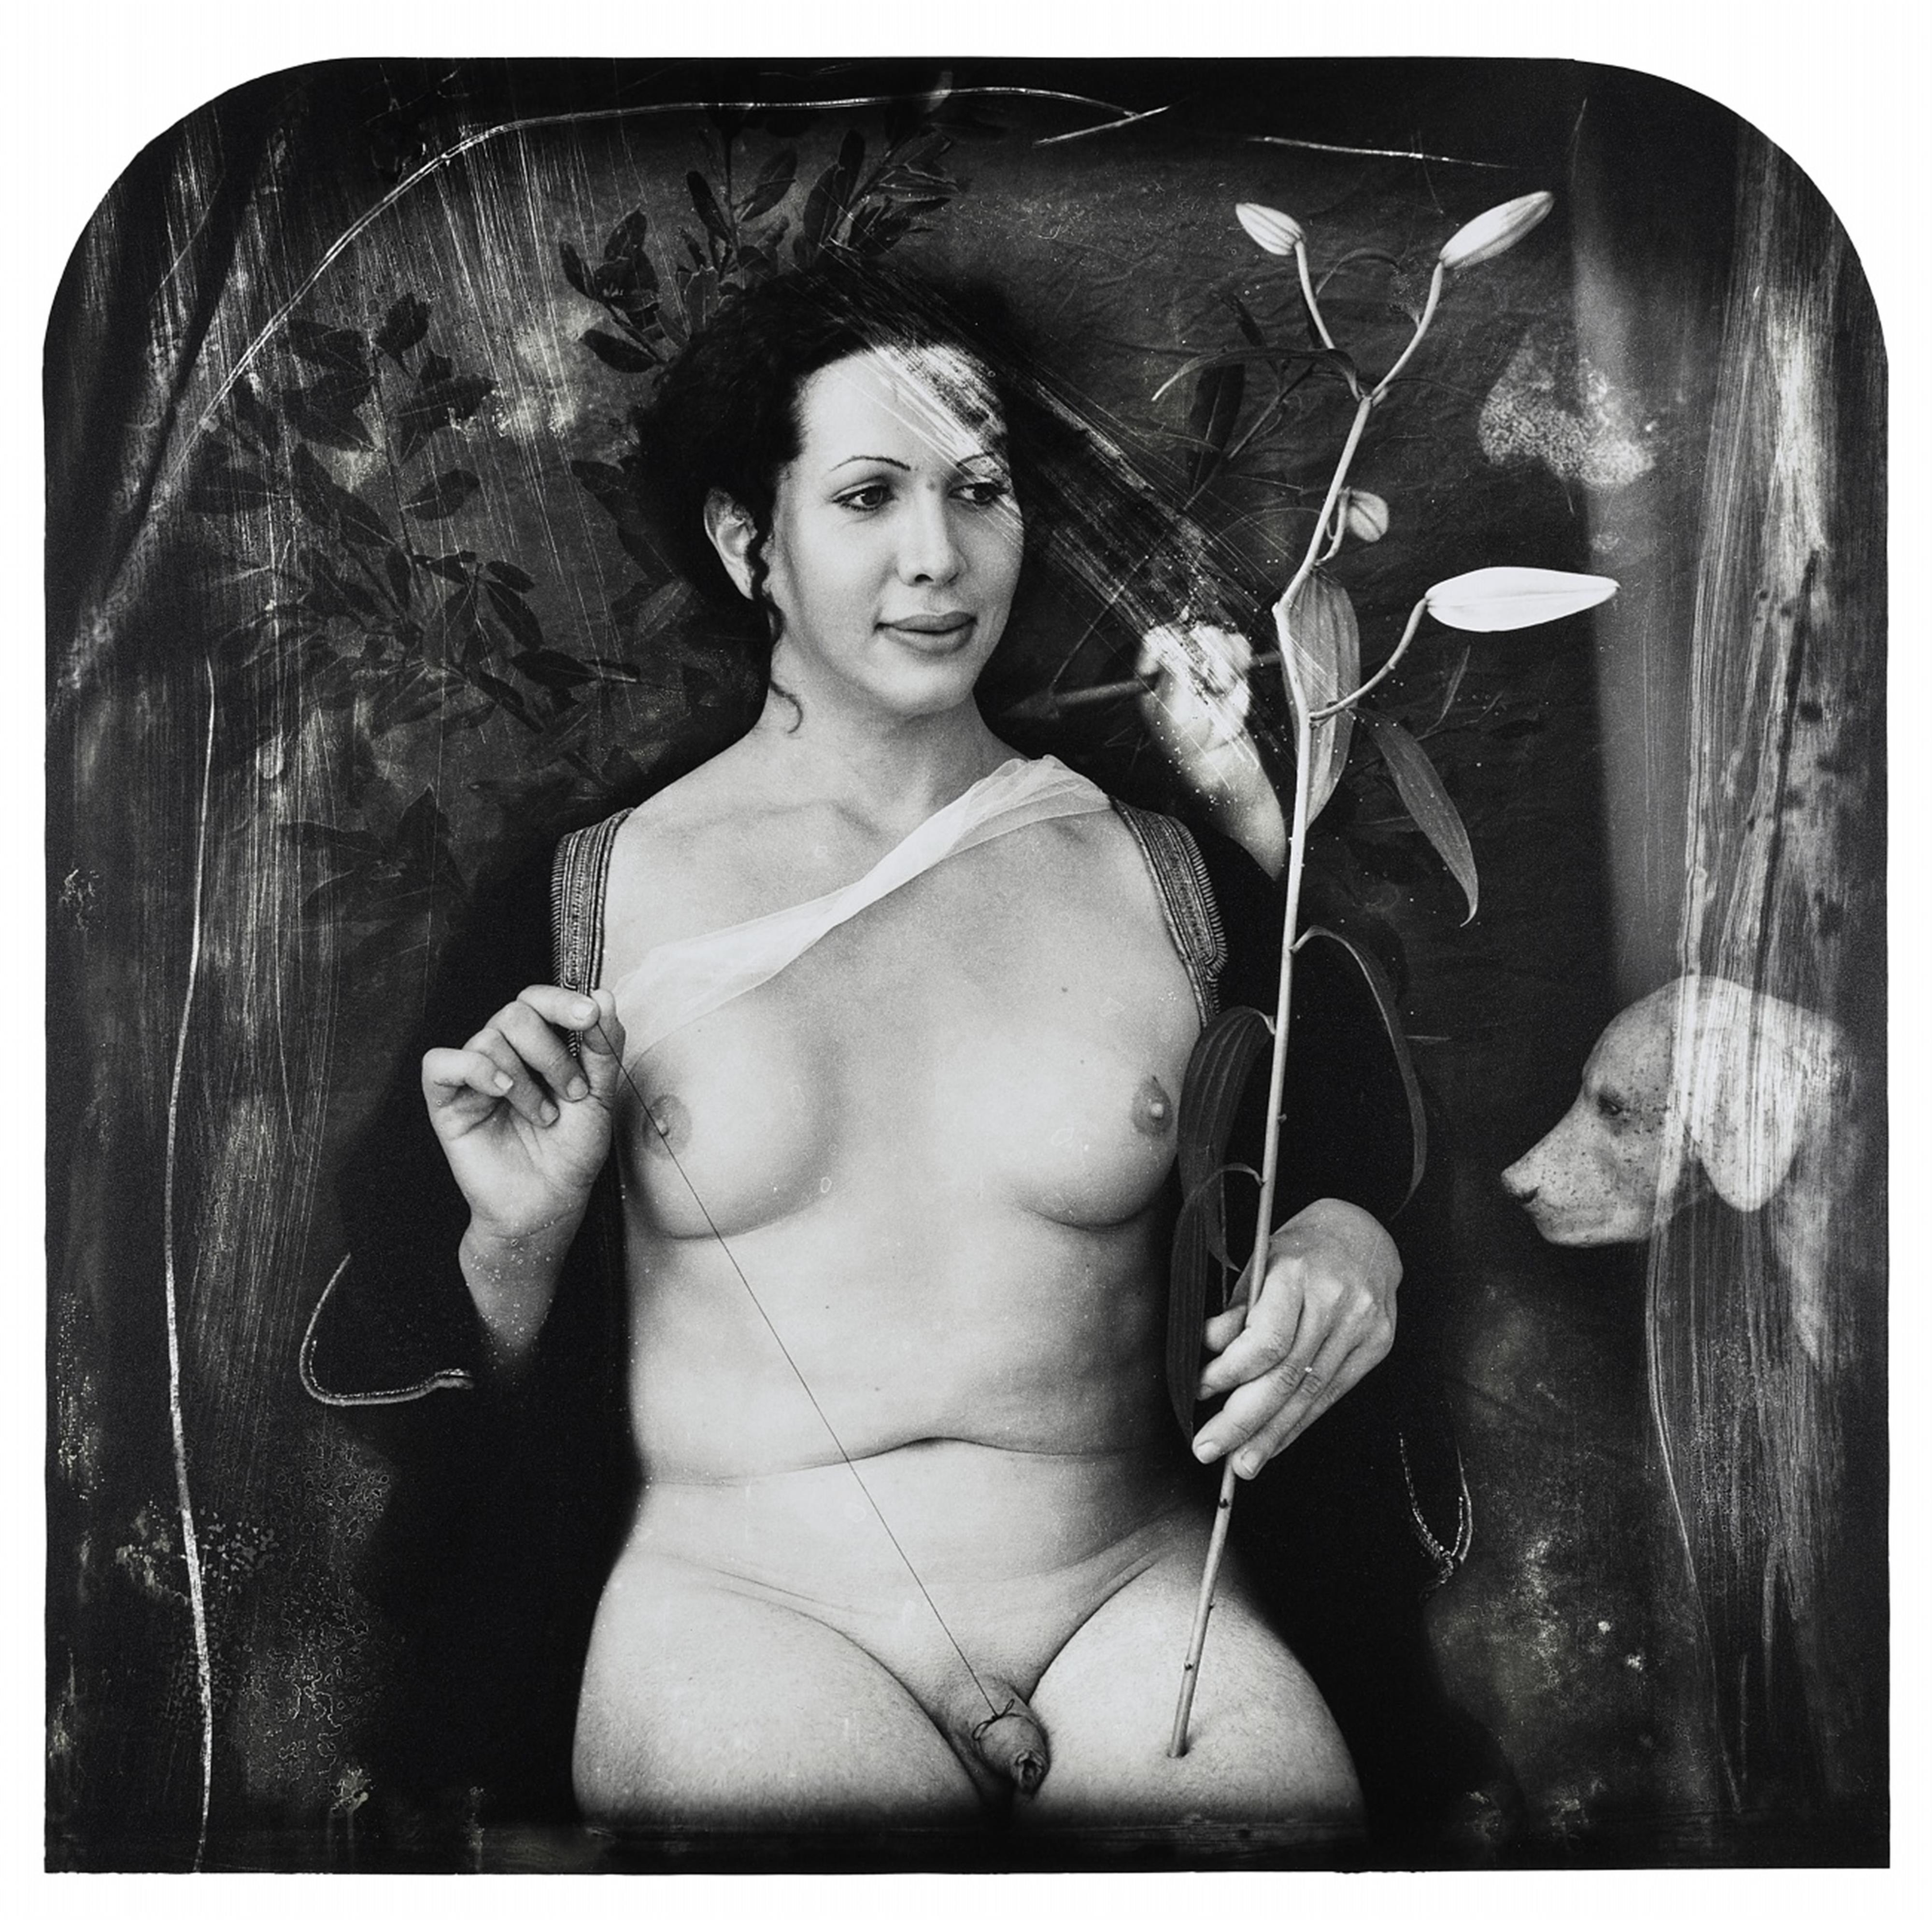 Joel-Peter Witkin - Portrait of Signoria Di Nobili and the Sorrows to come, Rome - image-1